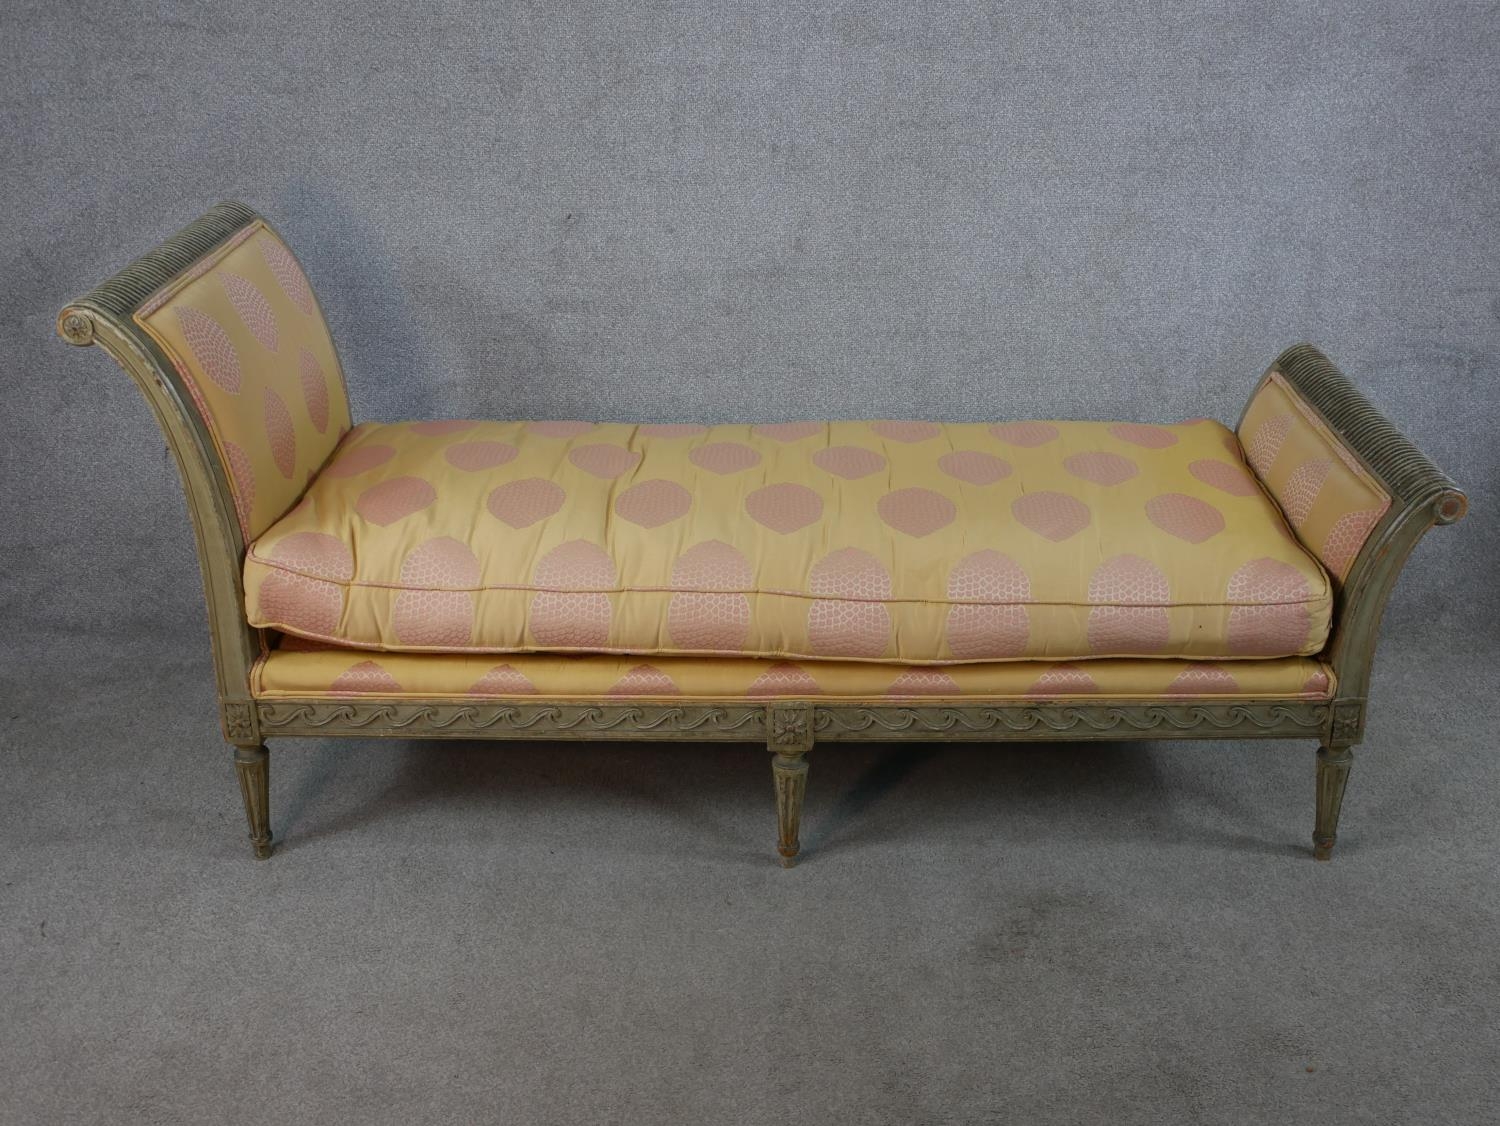 A 20th century Italian painted wooden framed daybed/child's bench with upholstered loose cushion